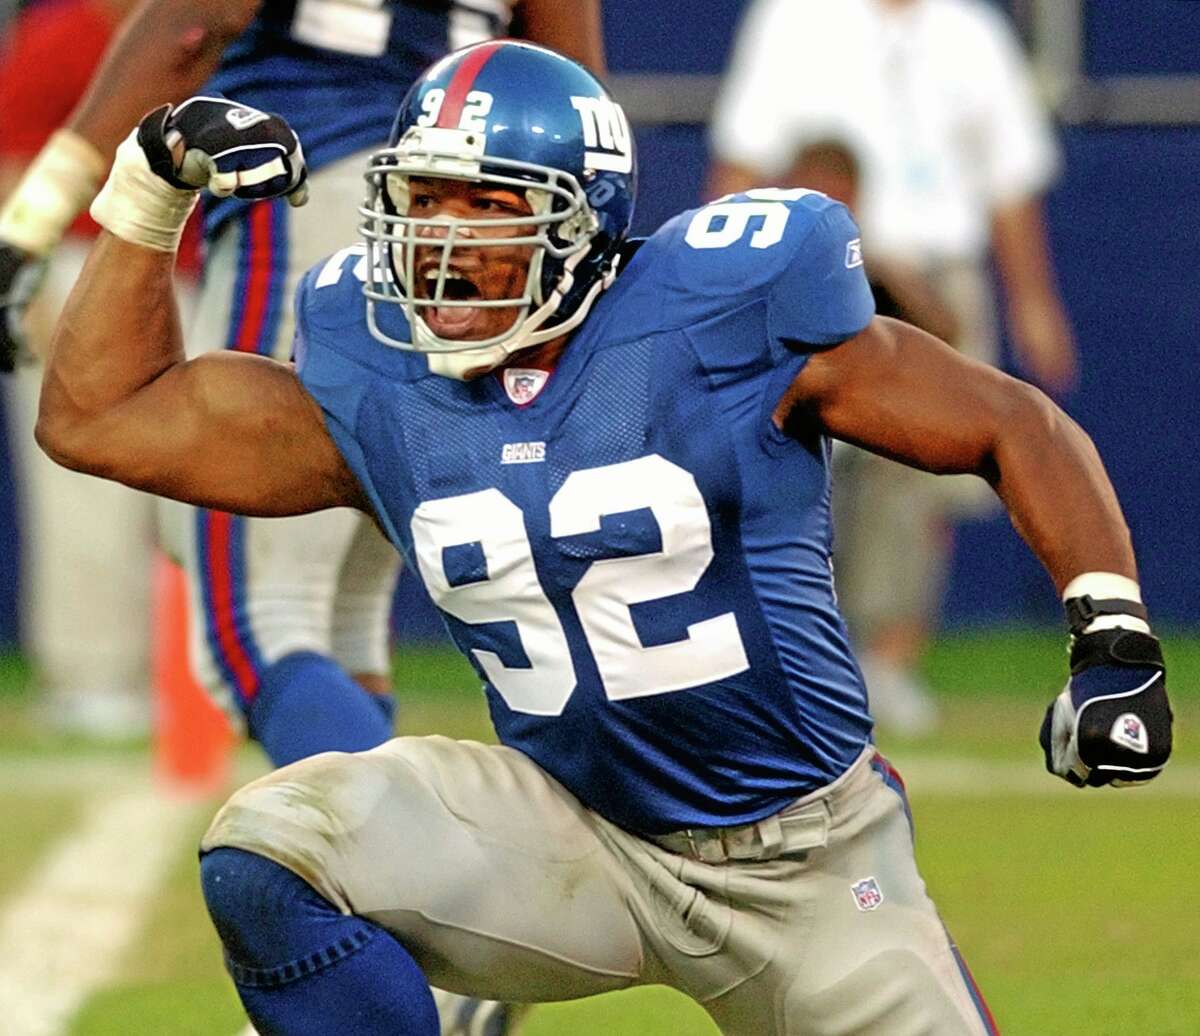 Former Giants defensive end Michael Strahan will be inducted into the Pro Football Hall of Fame on Saturday.